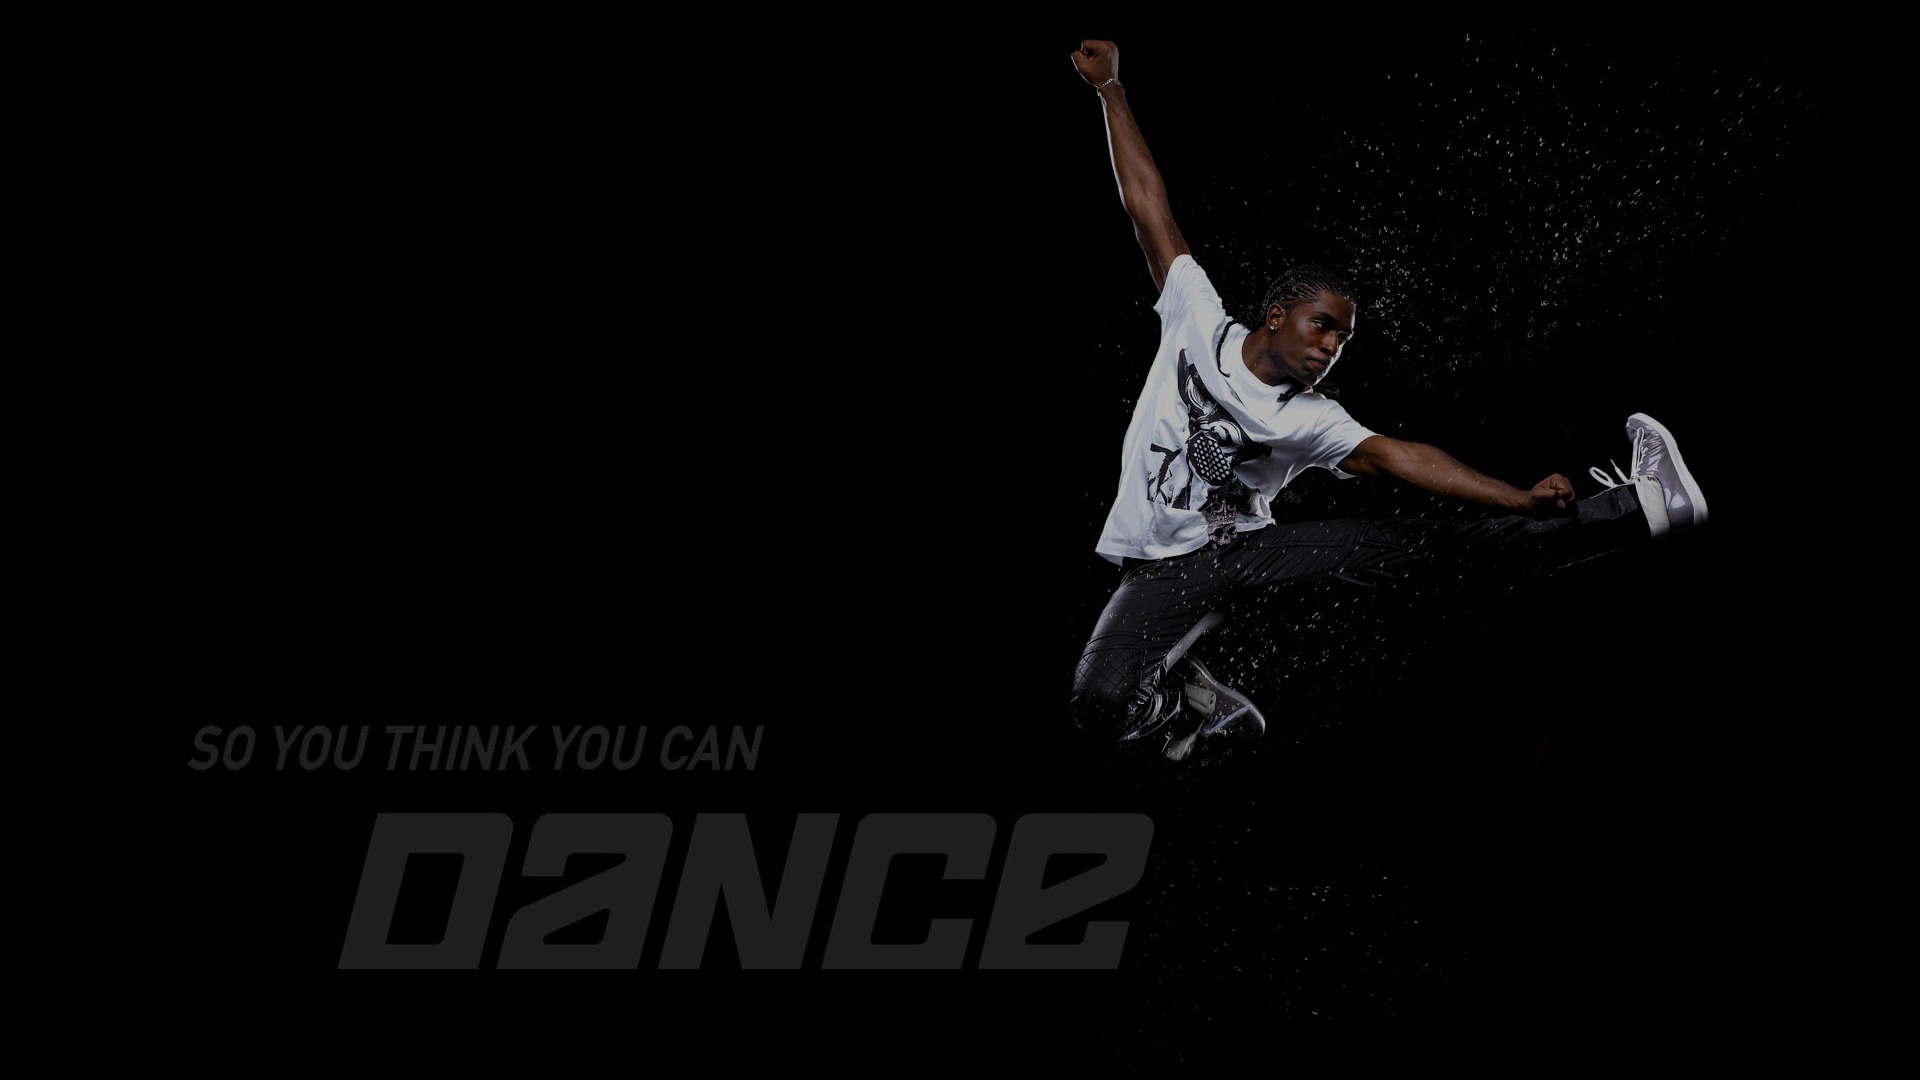 So You Think You Can Dance 舞林争霸 壁纸(二)4 - 1920x1080